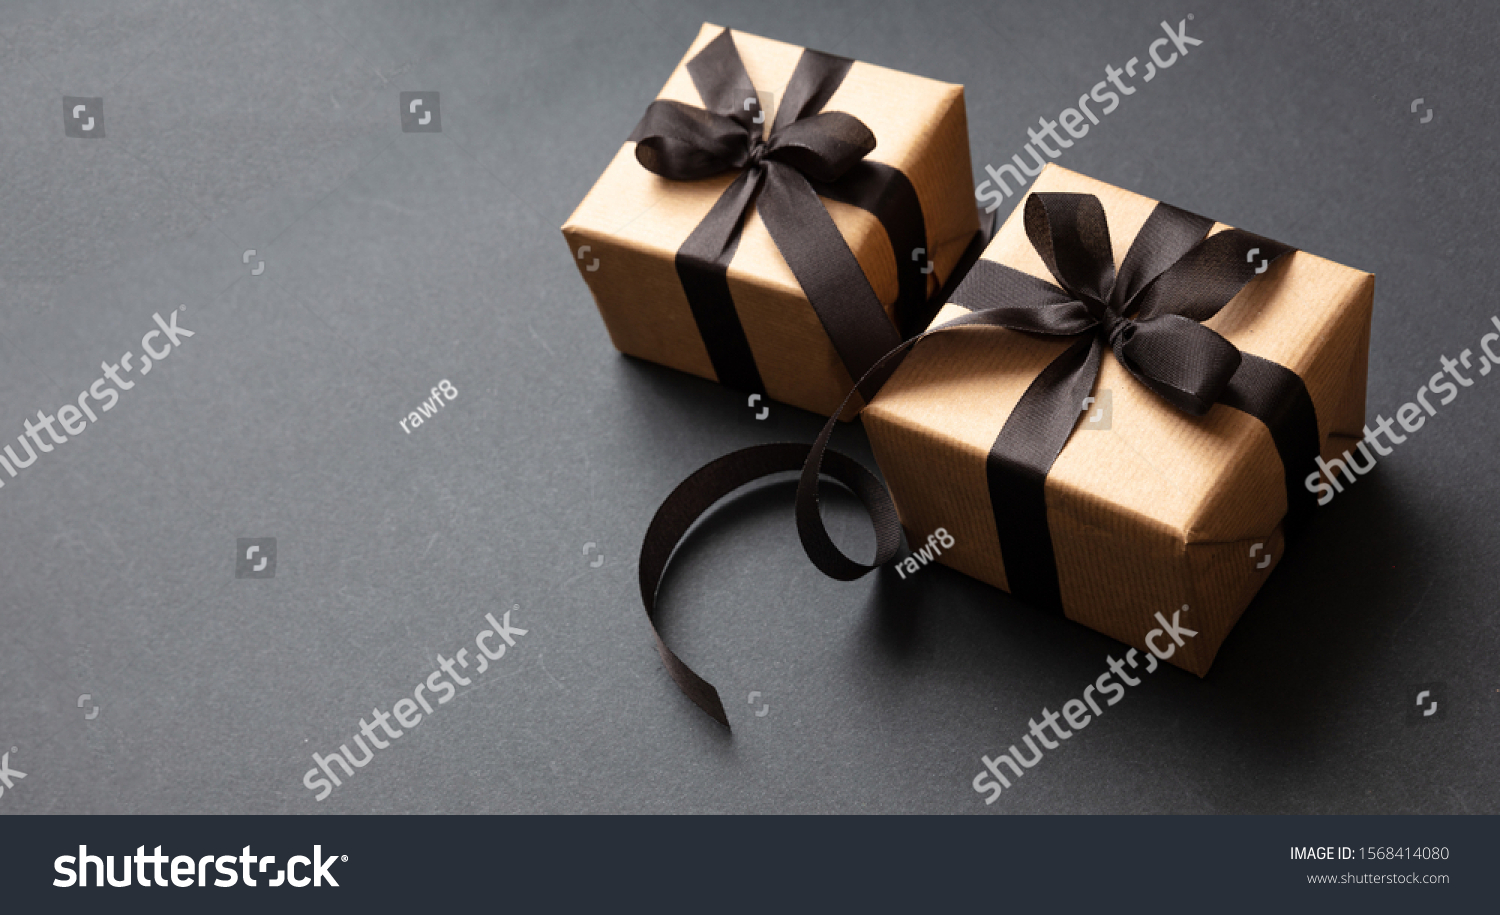 Black Friday sale concept. Gift boxes with black ribbon isolated against black background, high angle view #1568414080